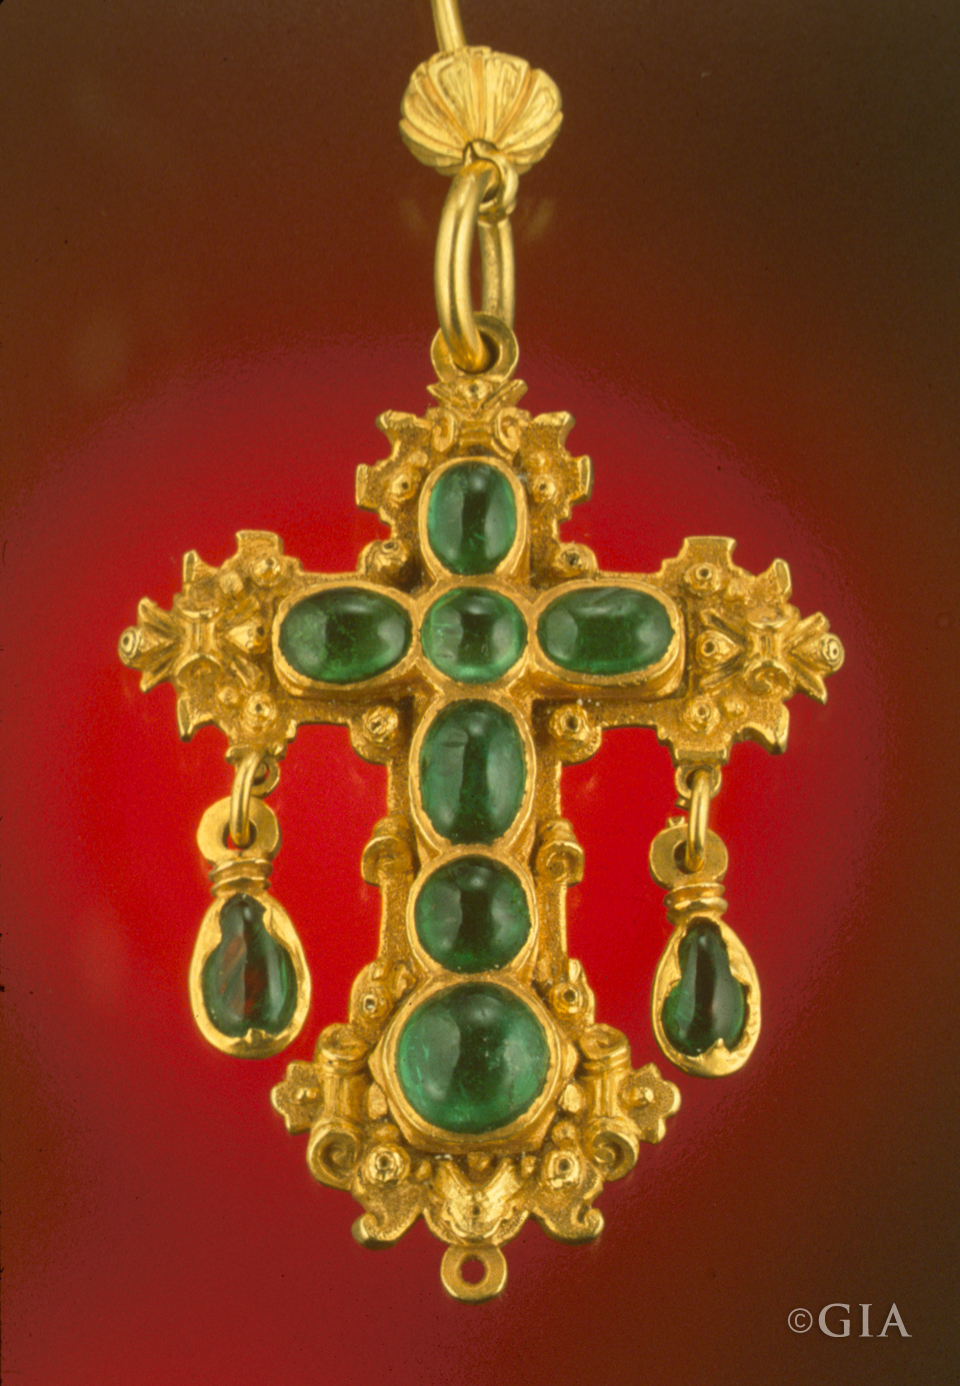 A cross set with emerald cabochons was one of the treasures brought up from the sunken Nuestra Señora de Atocha. Photo by Shane F. McClure/GIA.